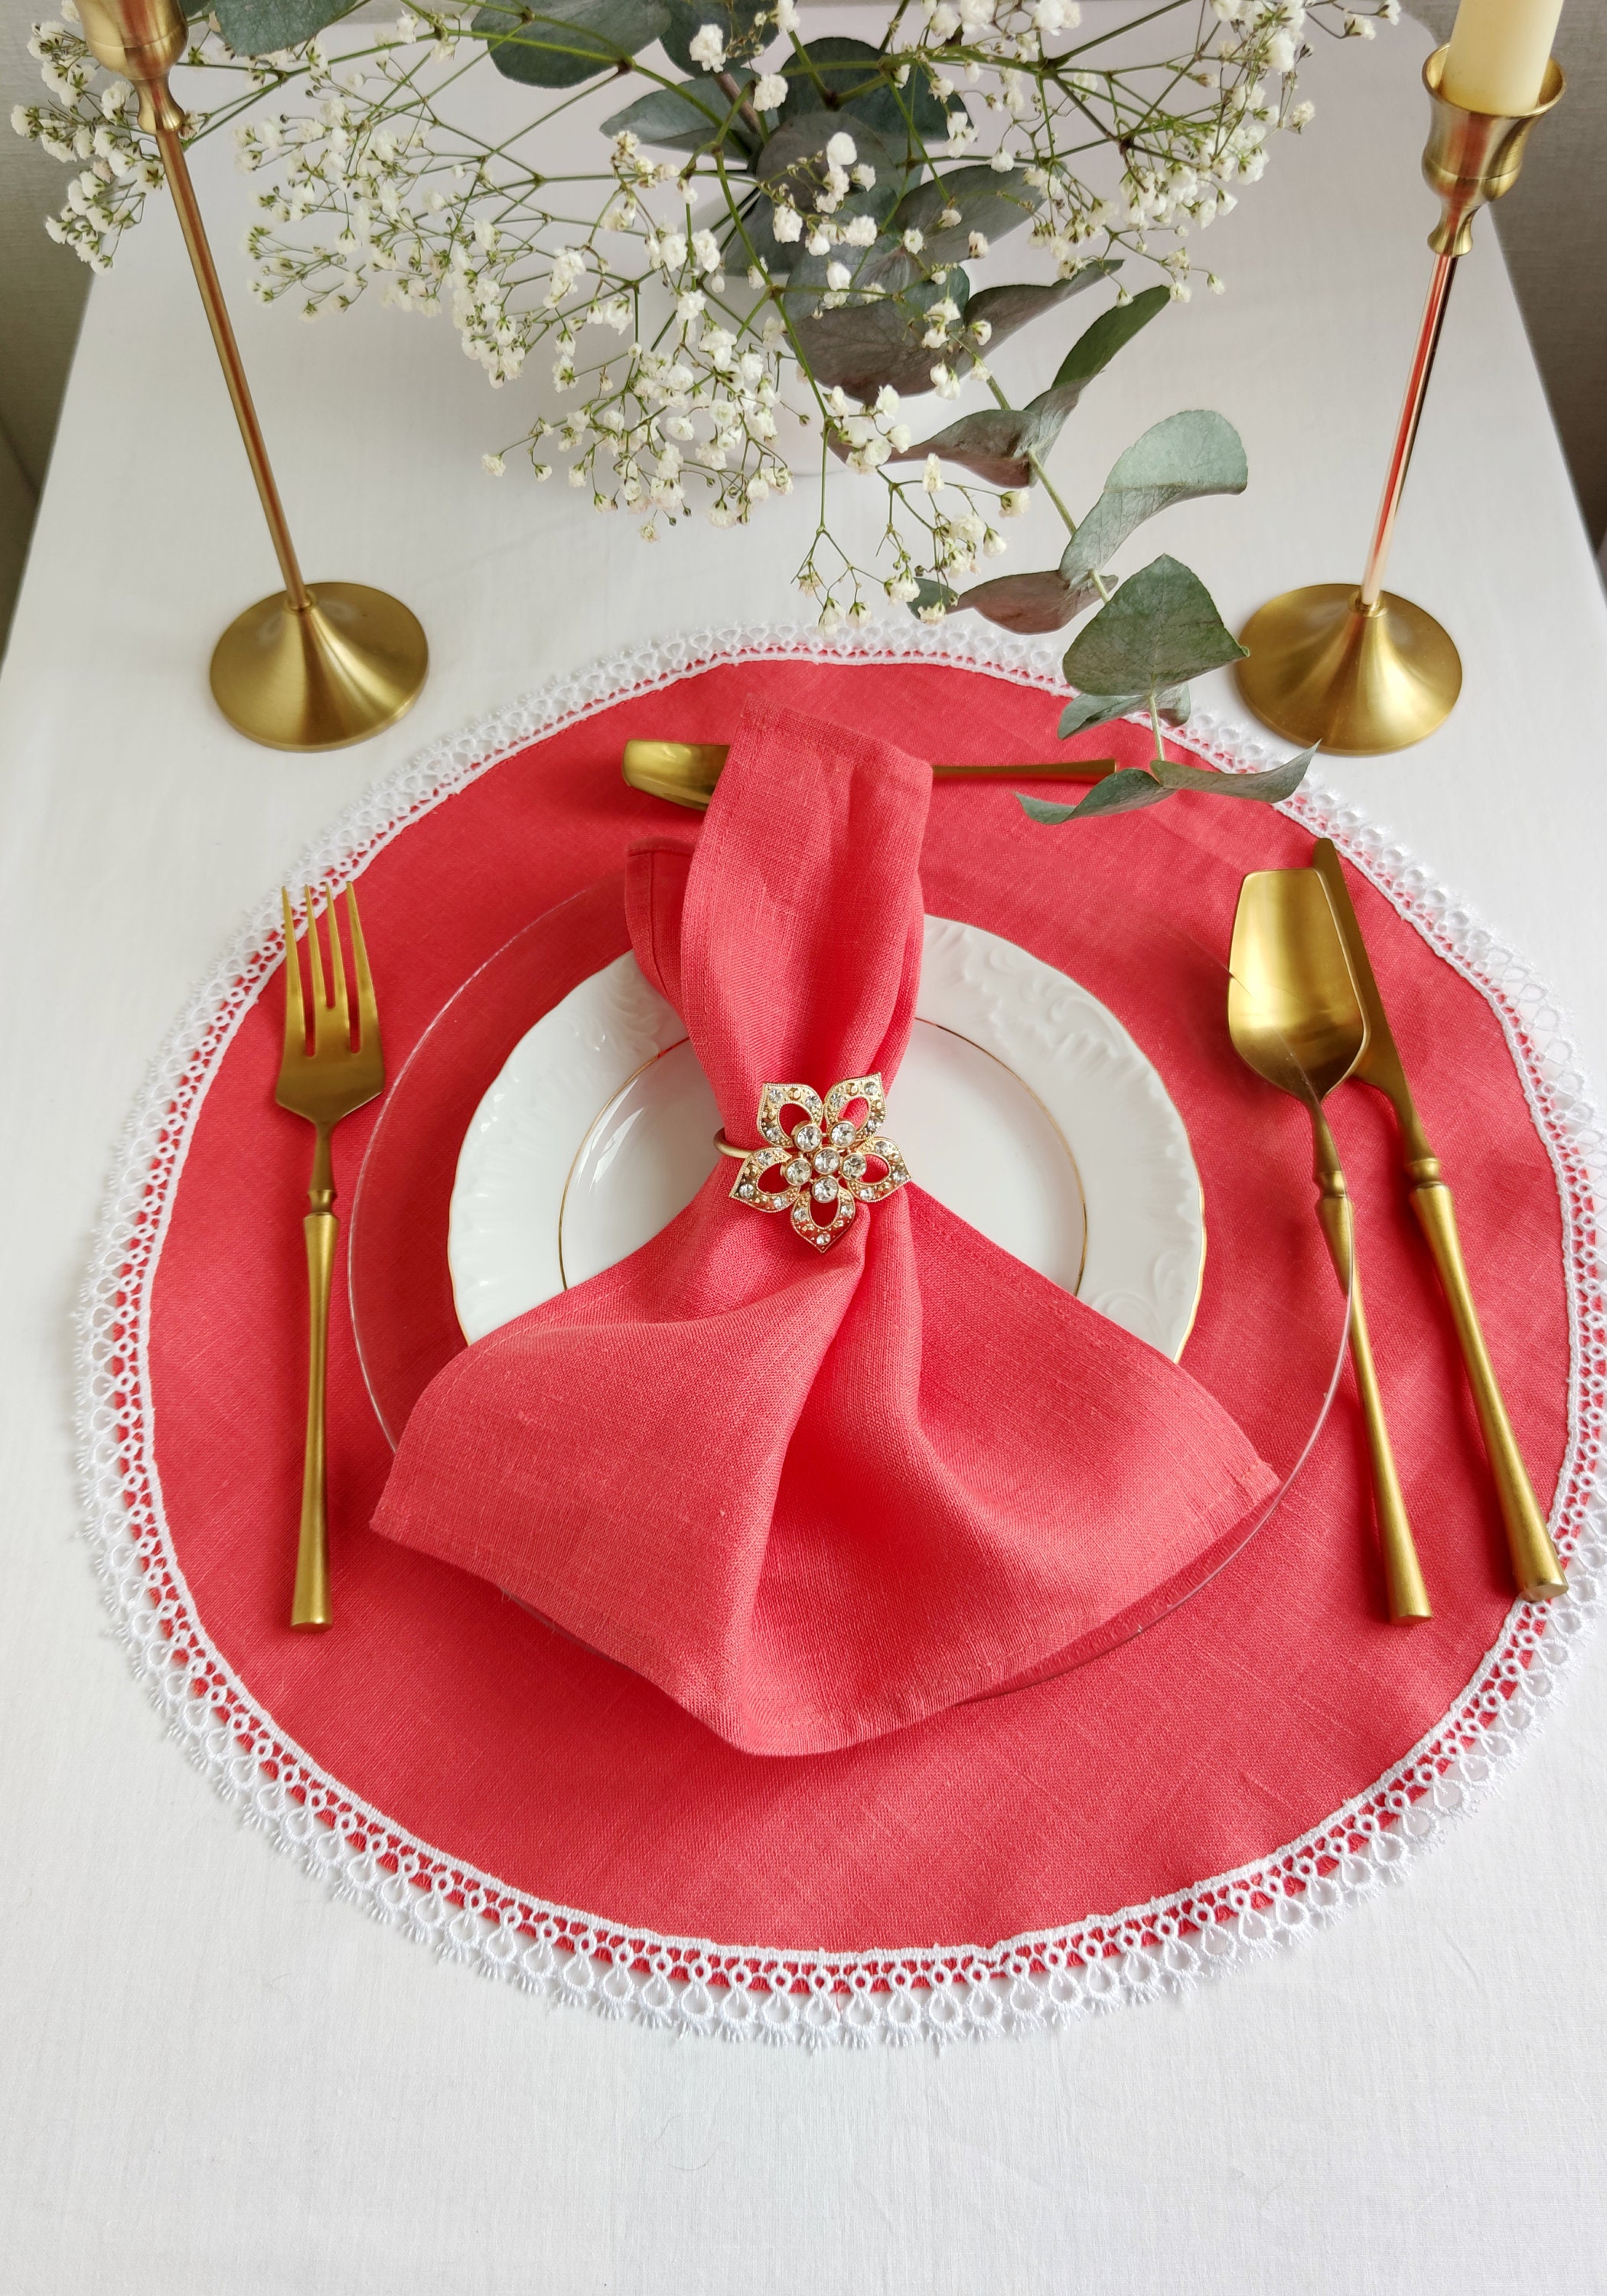 BEAUTIFUL! 12 DAYS OF CHRISTMAS LINEN NAPKINS BOXED SET W/GOLD COLOR * *